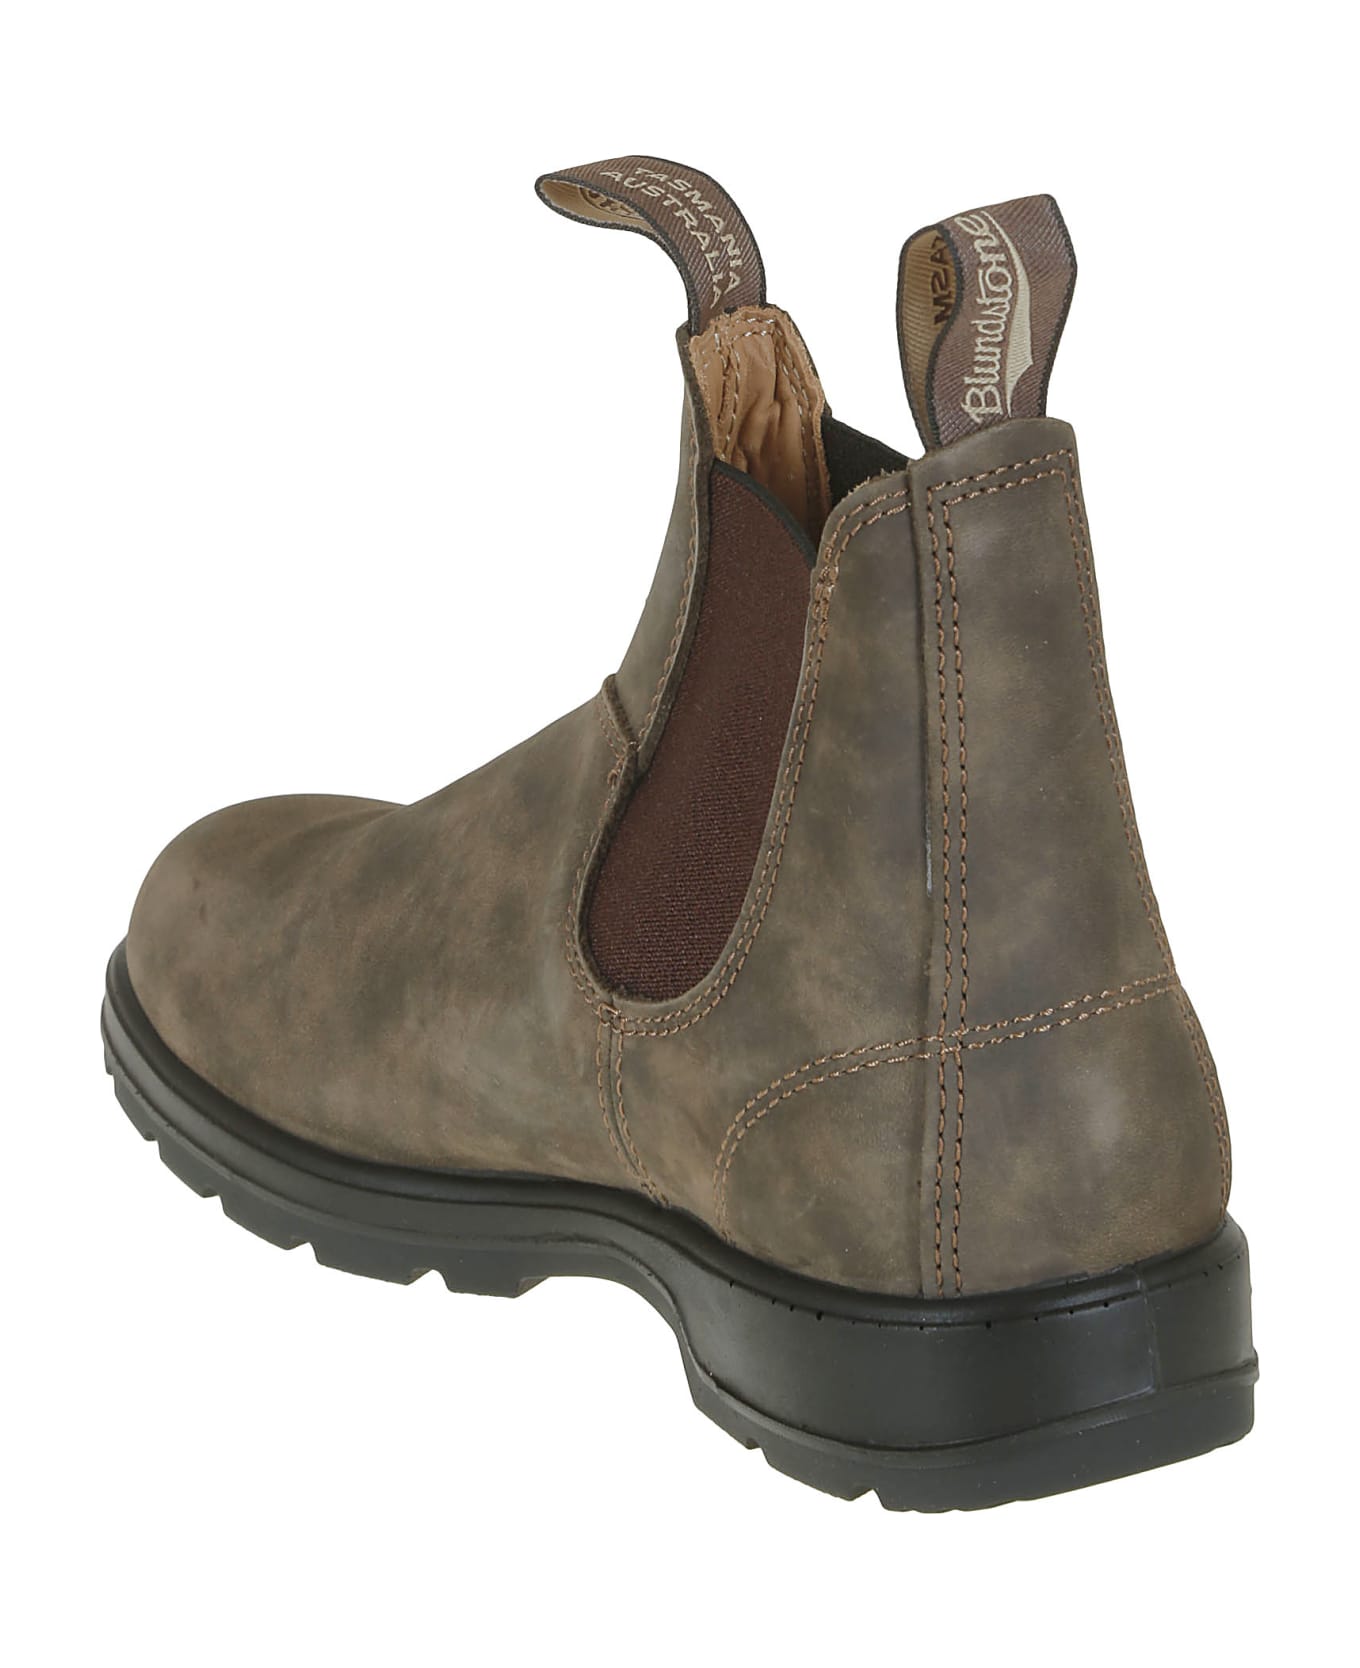 Blundstone 585 Rustic Brown Leather - Rustic Brown ブーツ